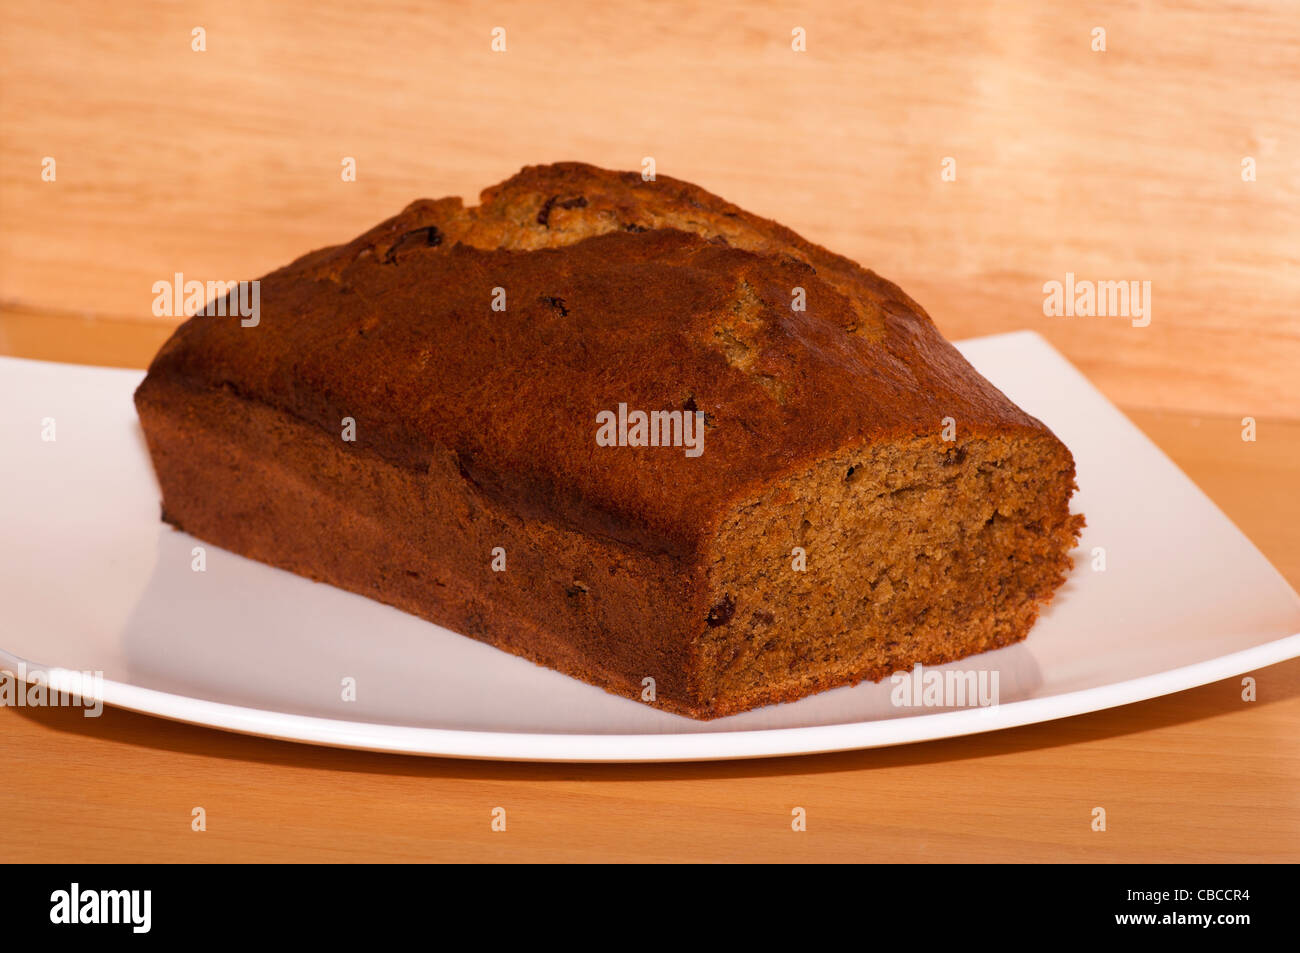 Home Baking Fresh Home Made Baked Cooked Banana Cake On A White Plate Stock Photo